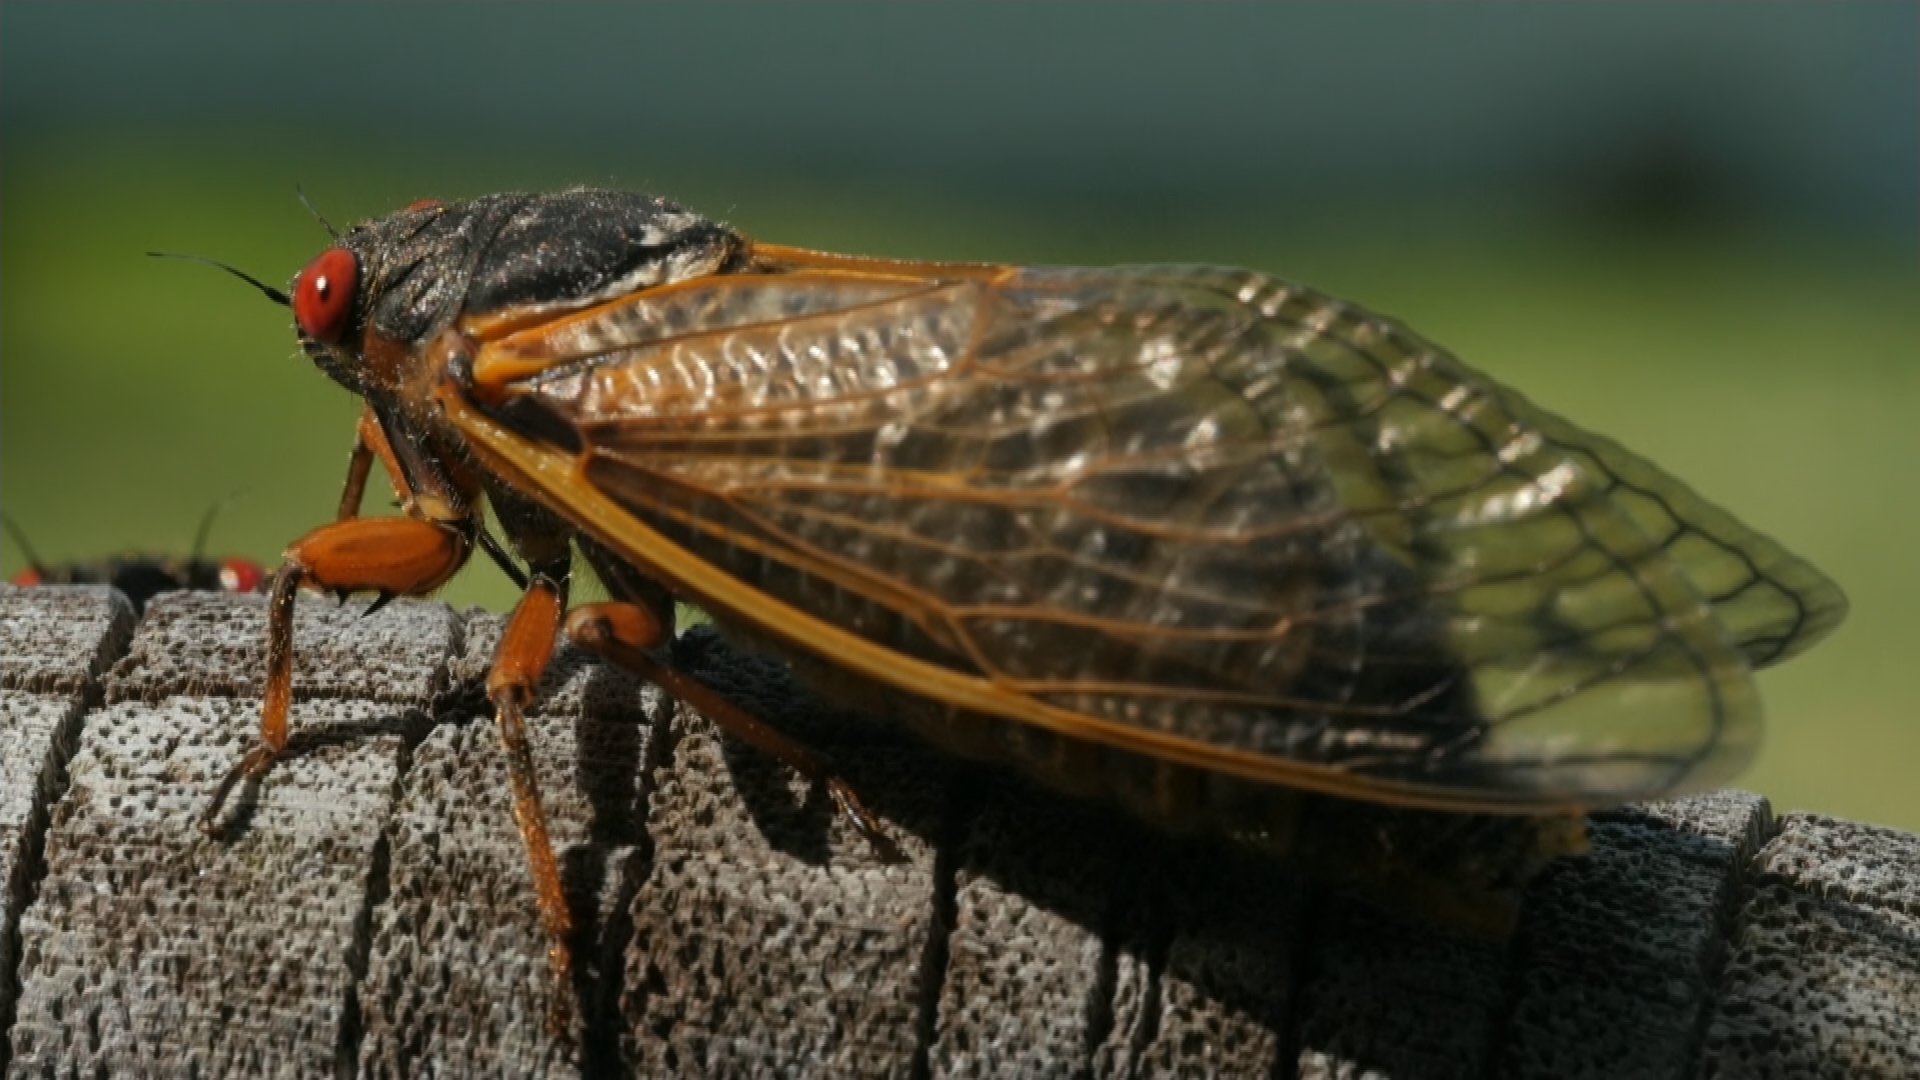 JUST LANDED: The Ripple Cicada is here!